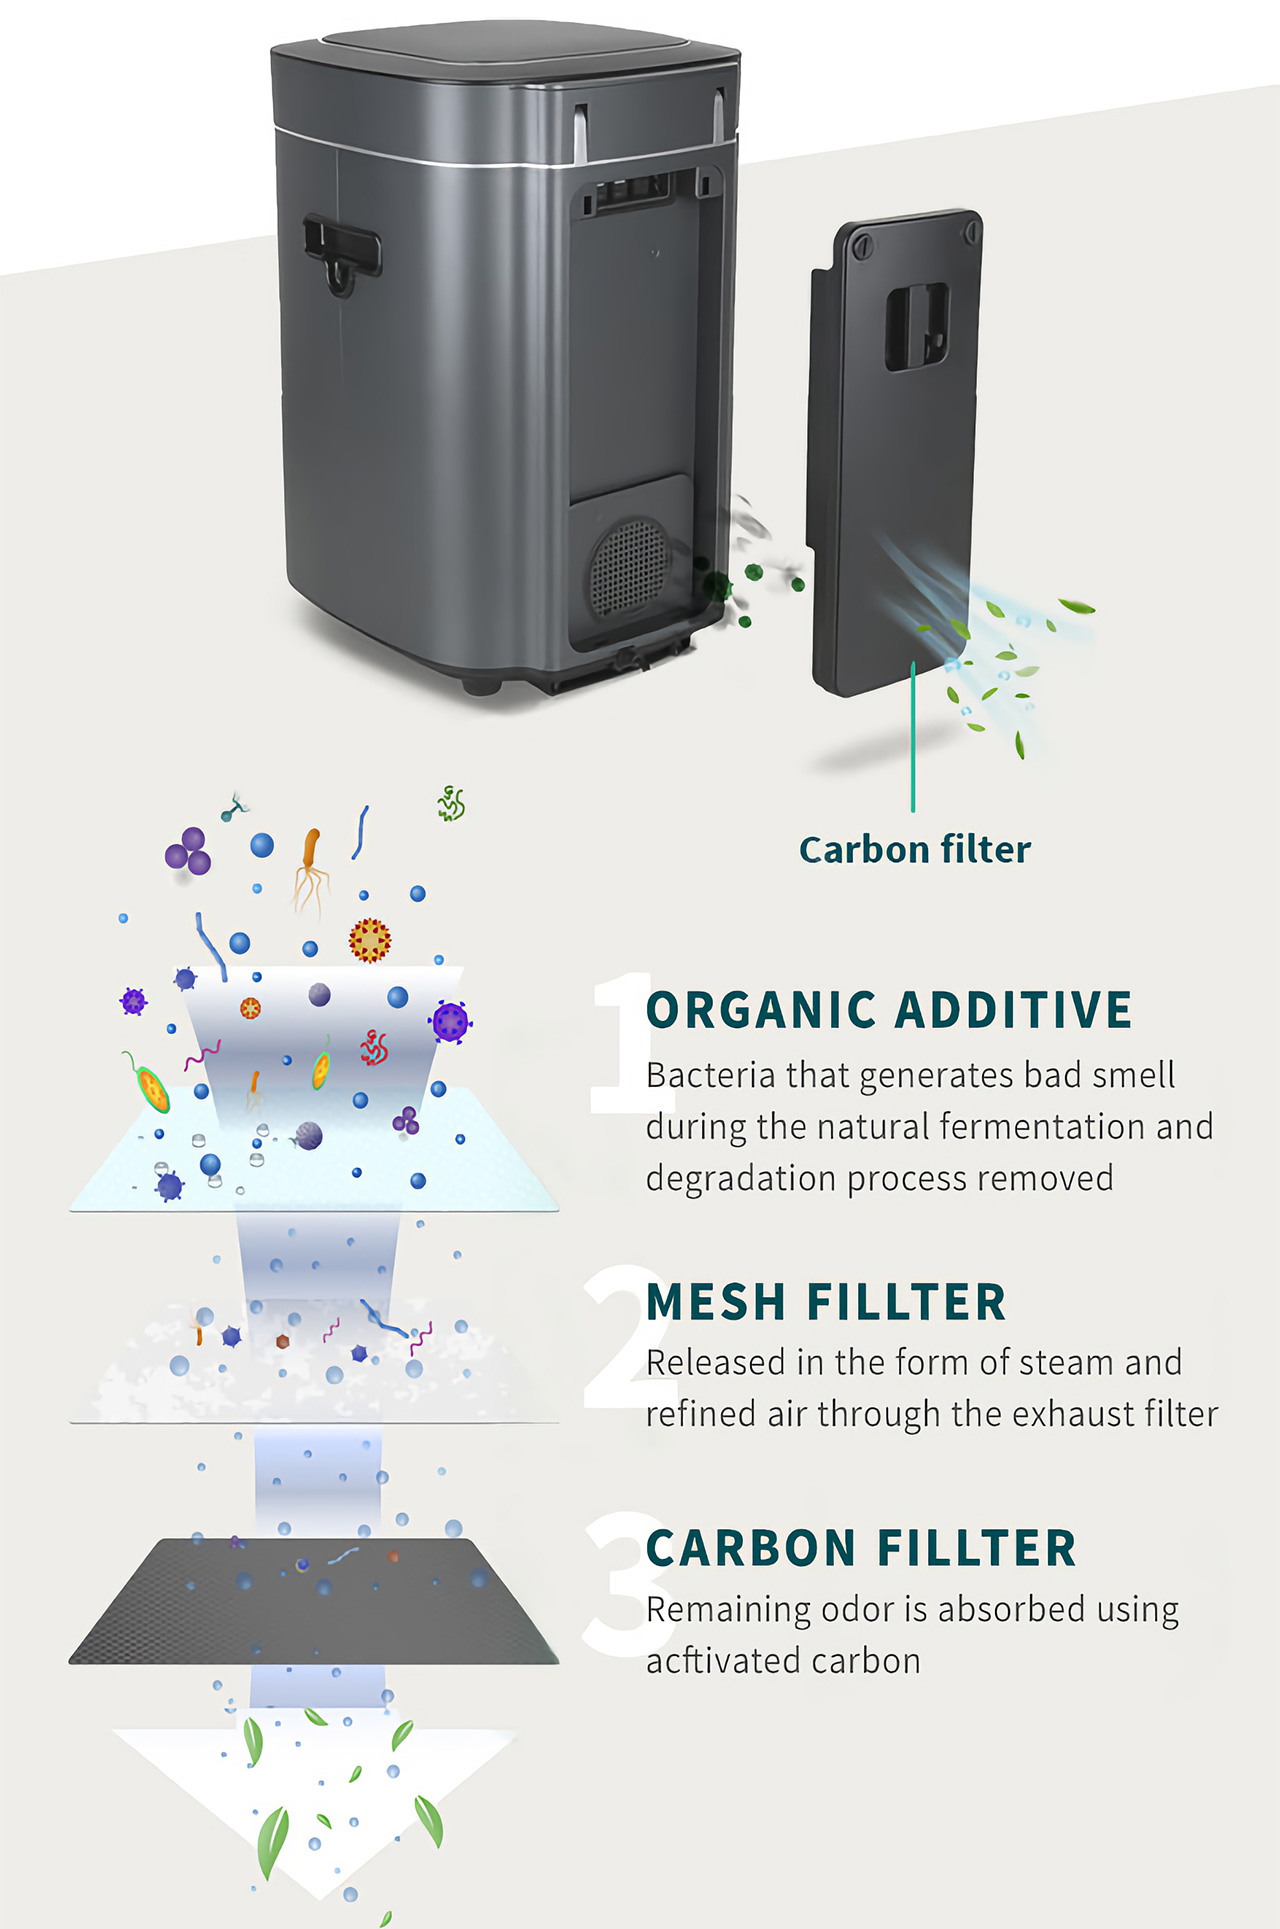 https://www.yankodesign.com/images/design_news/2021/11/this-kitchen-appliance-will-effectively-turn-all-your-food-waste-into-nutrient-rich-soil-fertilizer/Reencle_food_recycler_compost_bin_10.jpg